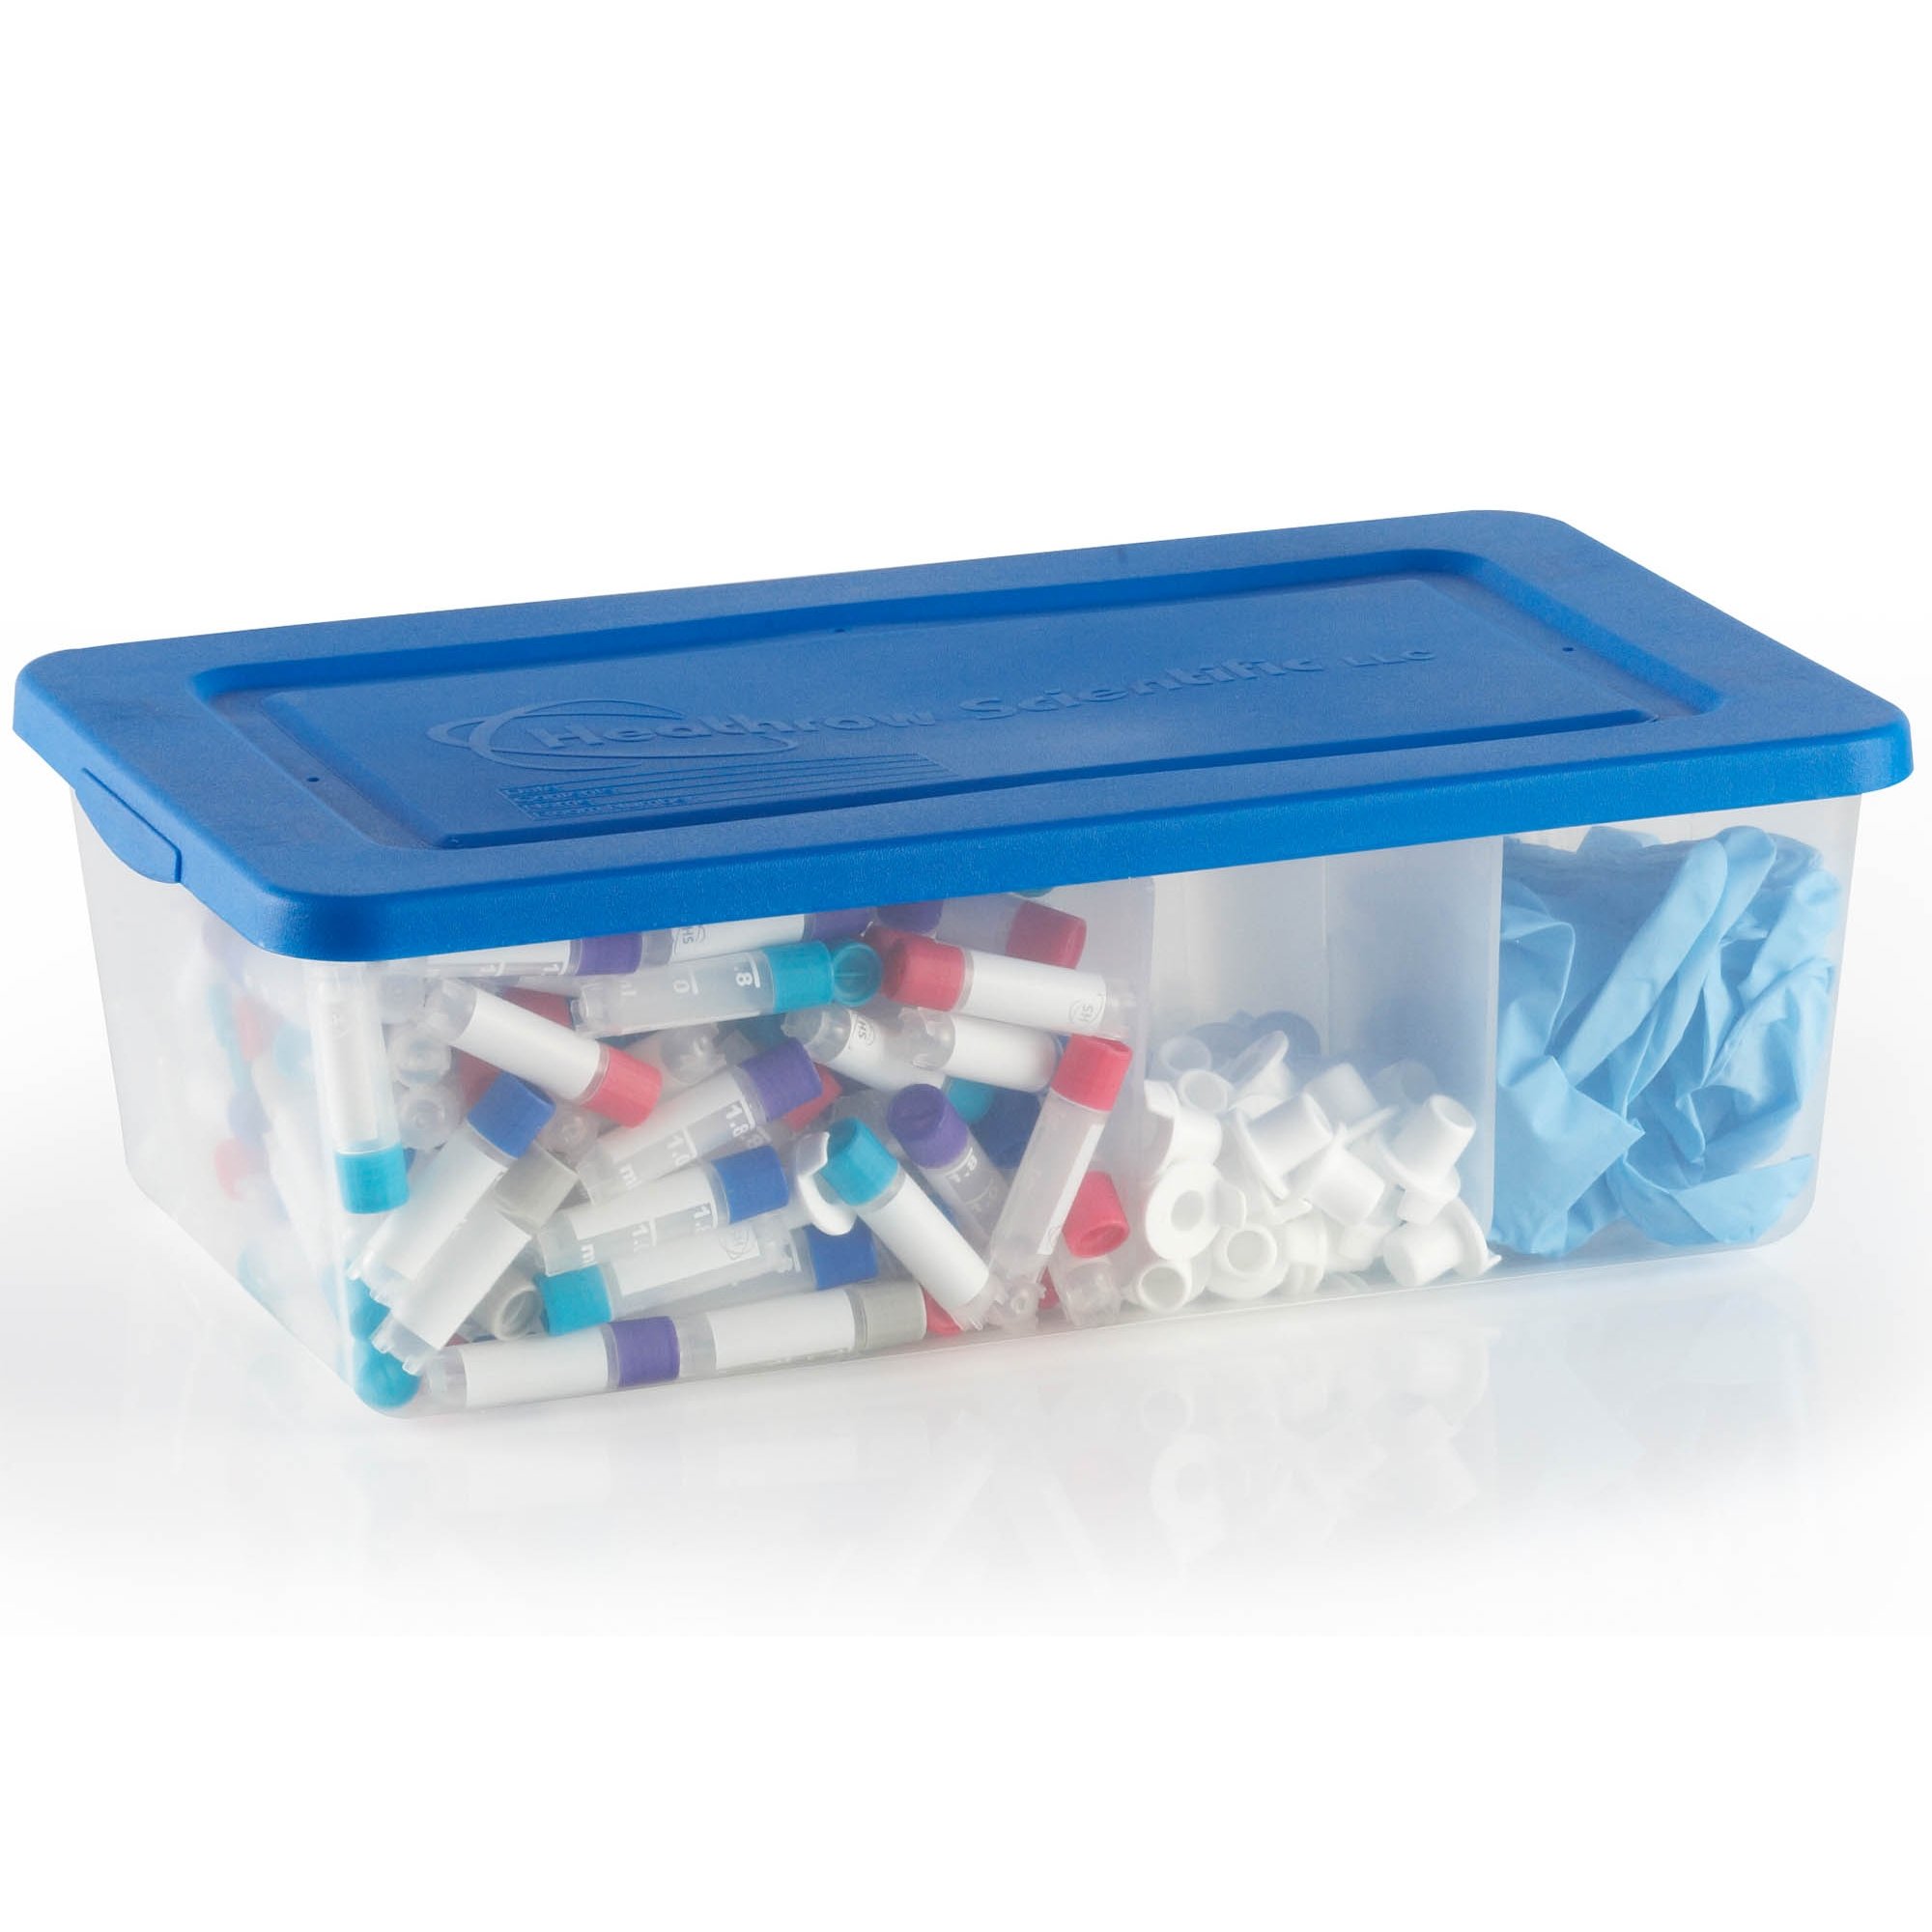 https://www.universalmedicalinc.com/media/catalog/product/cache/b4c565ddf1bc021465048acd78c313cc/h/s/hs23453_tubby-storage-container-with-lid-and-divider.jpg